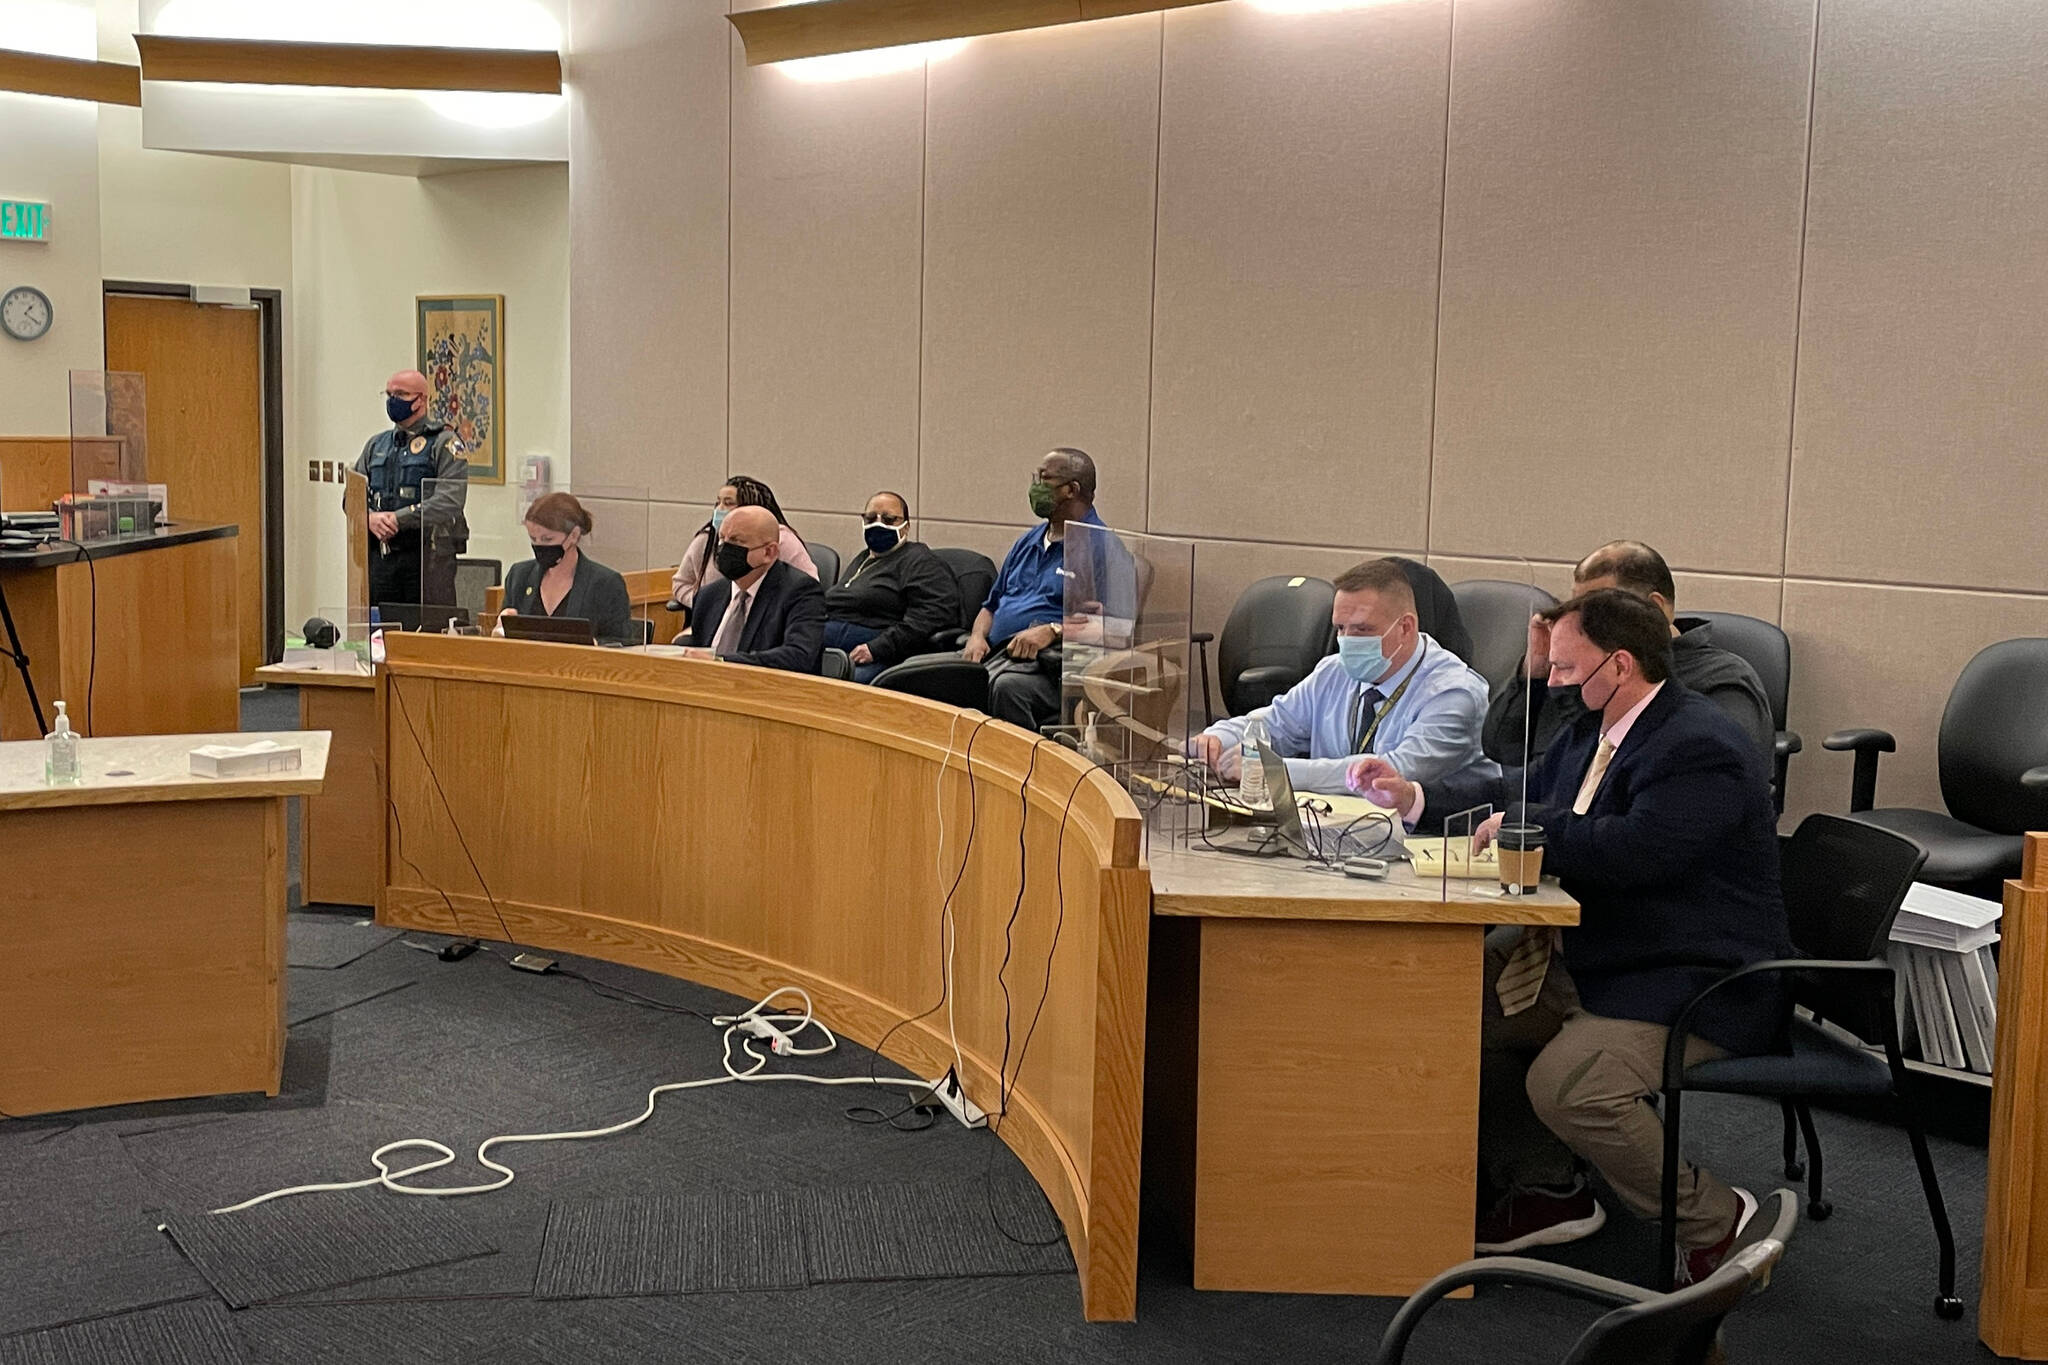 Members of the prosecution and defense, including defendant John Stapleton, sit during a trial for a 2018 killing on Jan. 13, 2022. (Michael S. Lockett / Juneau Empire File)